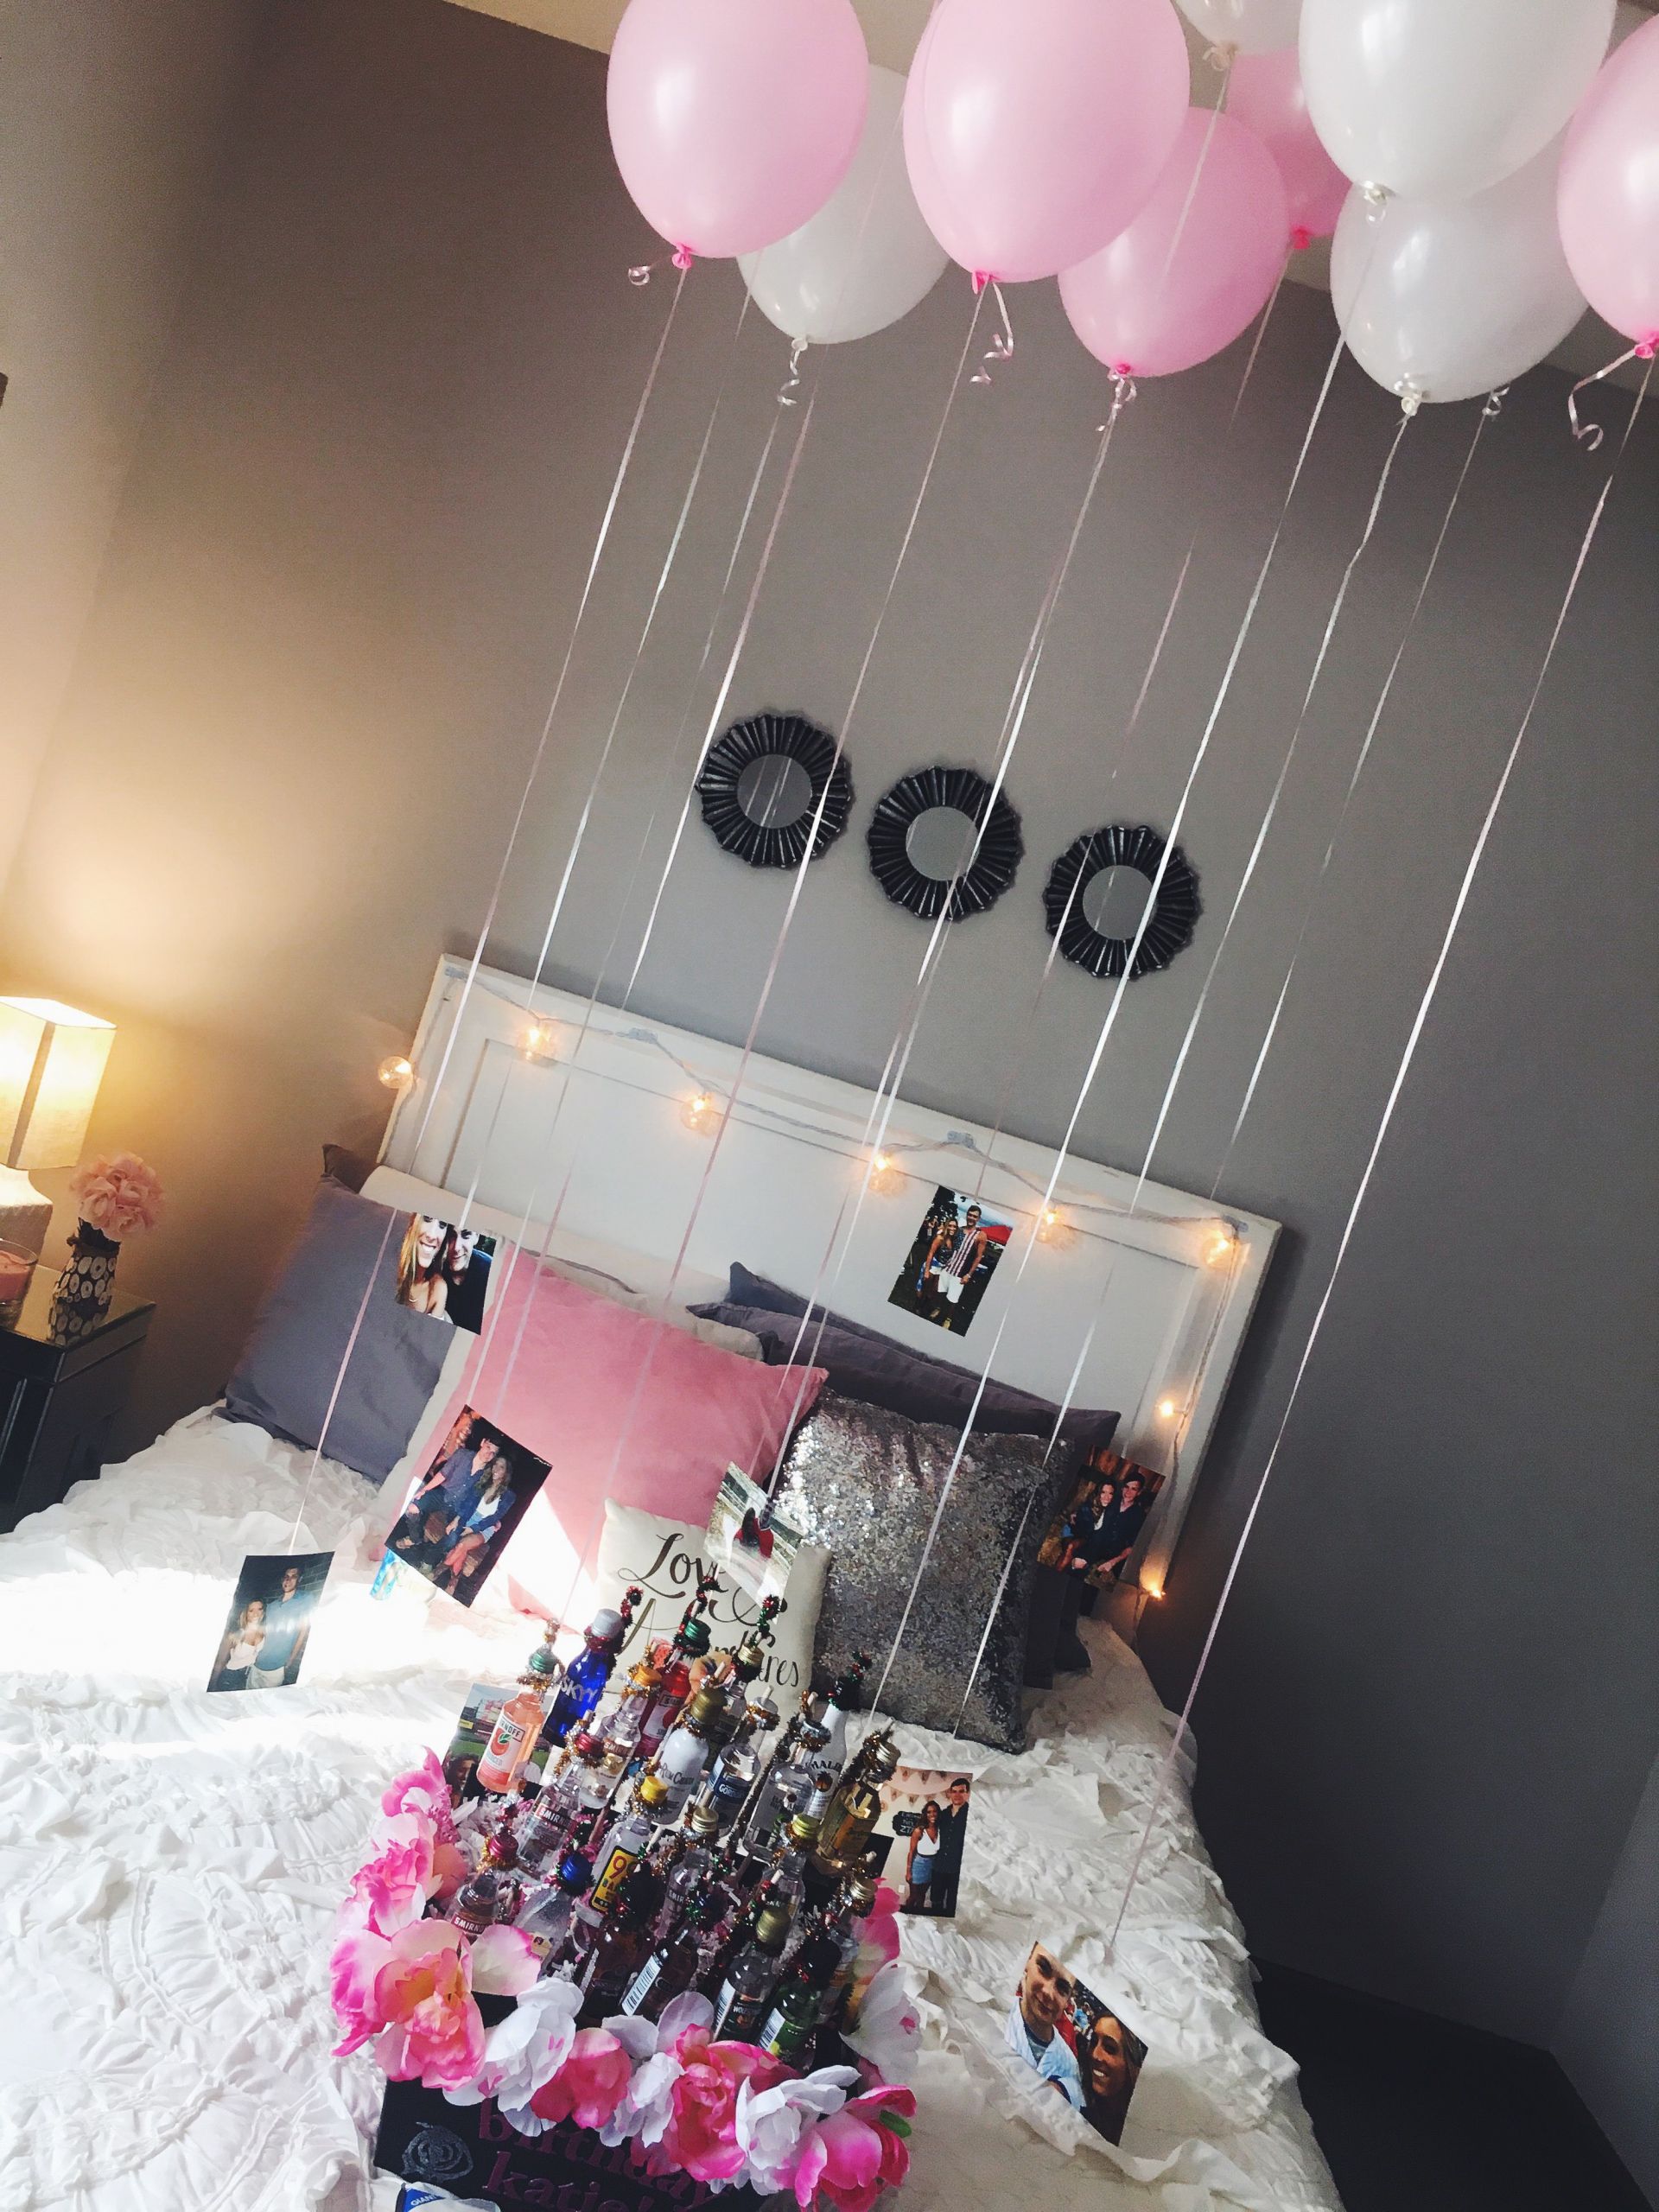 Cute Gift Ideas For Your Girlfriend
 easy and cute decorations for a friend or girlfriends 21st